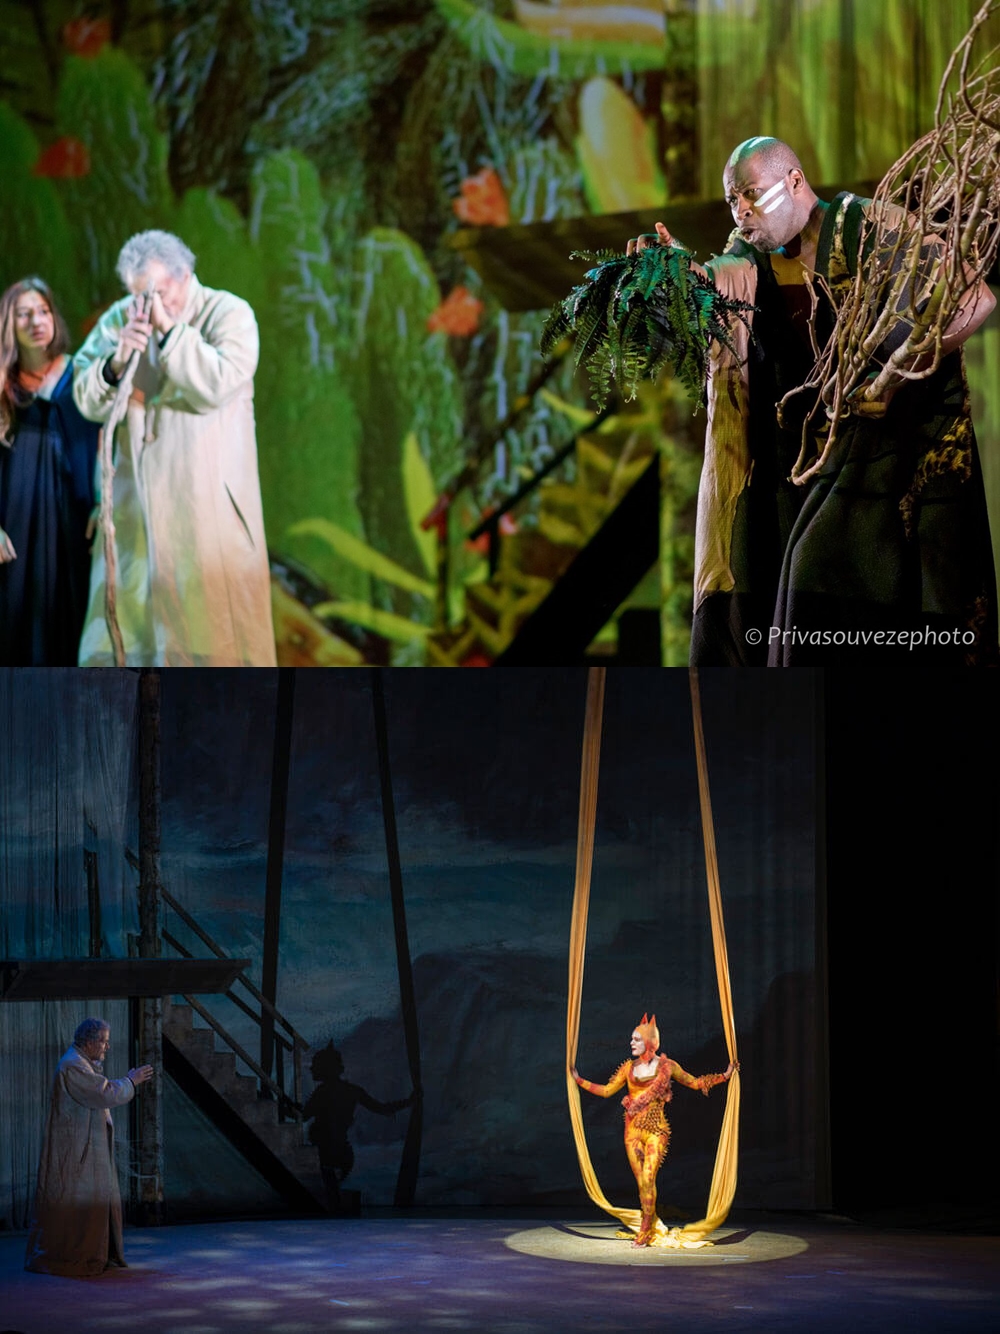 New snaps from ‘THE TEMPEST’